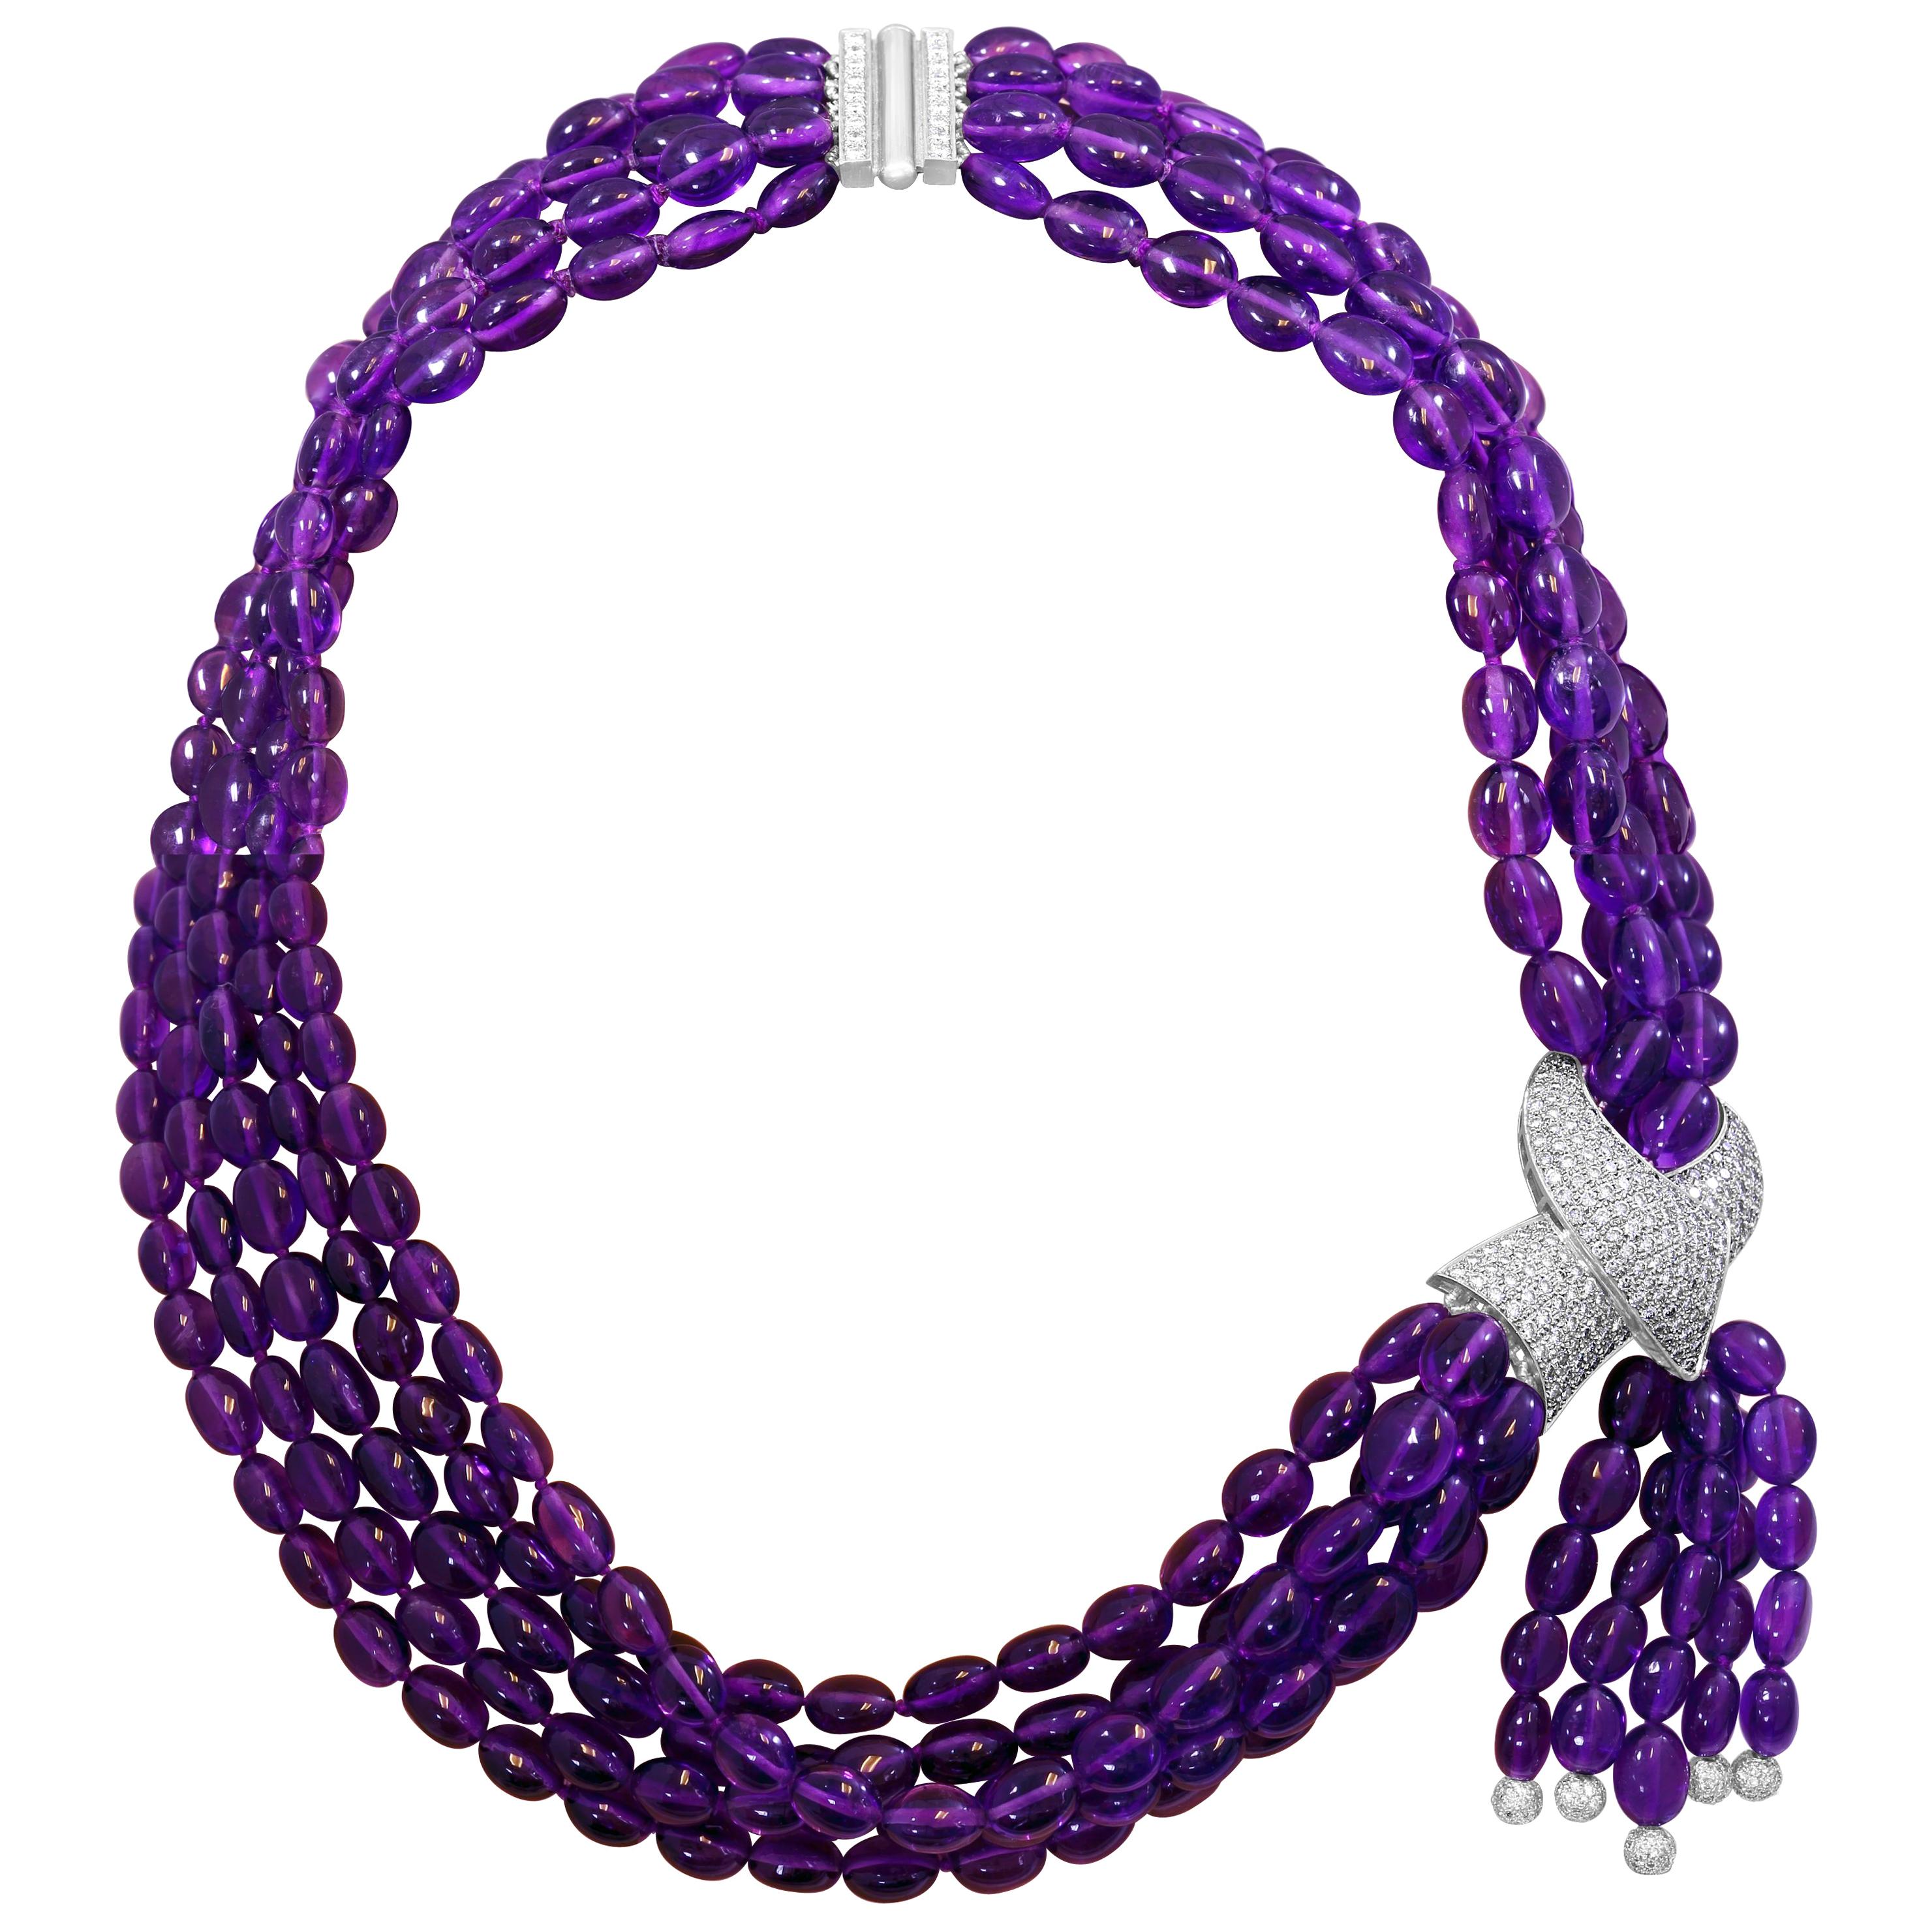 700 Ct Natural Amethyst Multi Layer Bead Necklace in Platinum with 9 Ct Diamonds For Sale